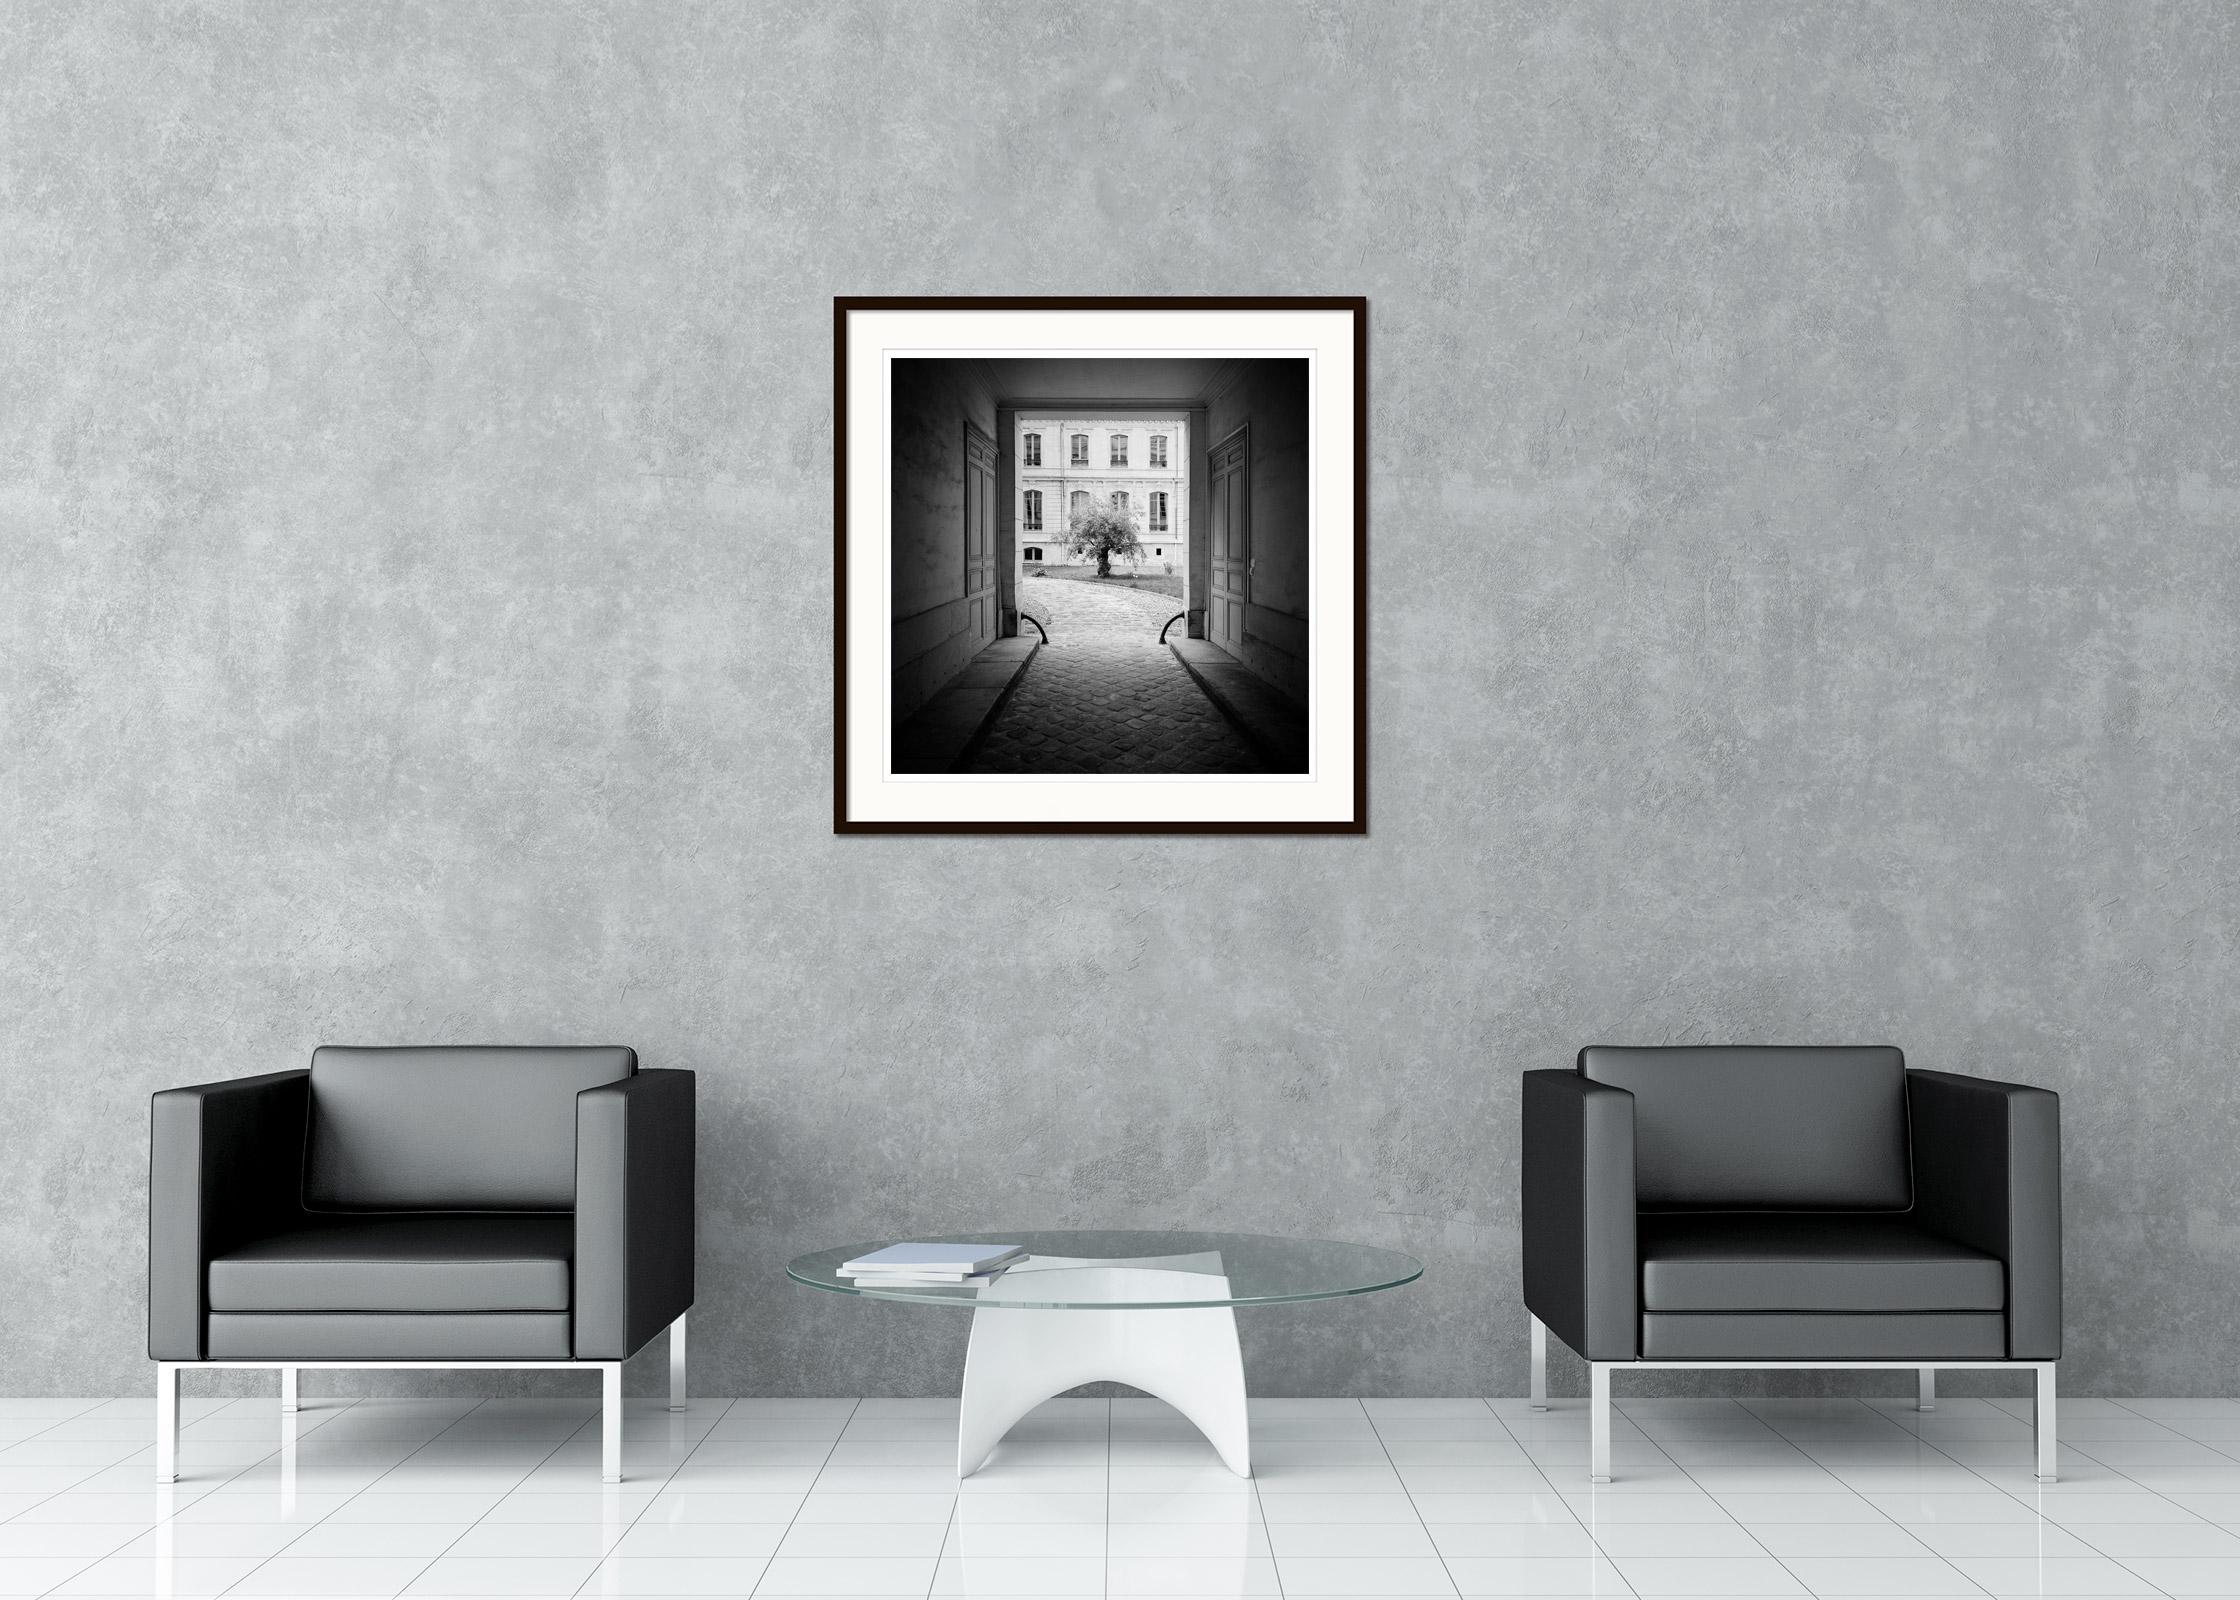 Black and White Fine Art cityscape photography. Archival pigment ink print, edition of 9. Signed, titled, dated and numbered by artist. Certificate of authenticity included. Printed with 4cm white border. International award winner photographer -